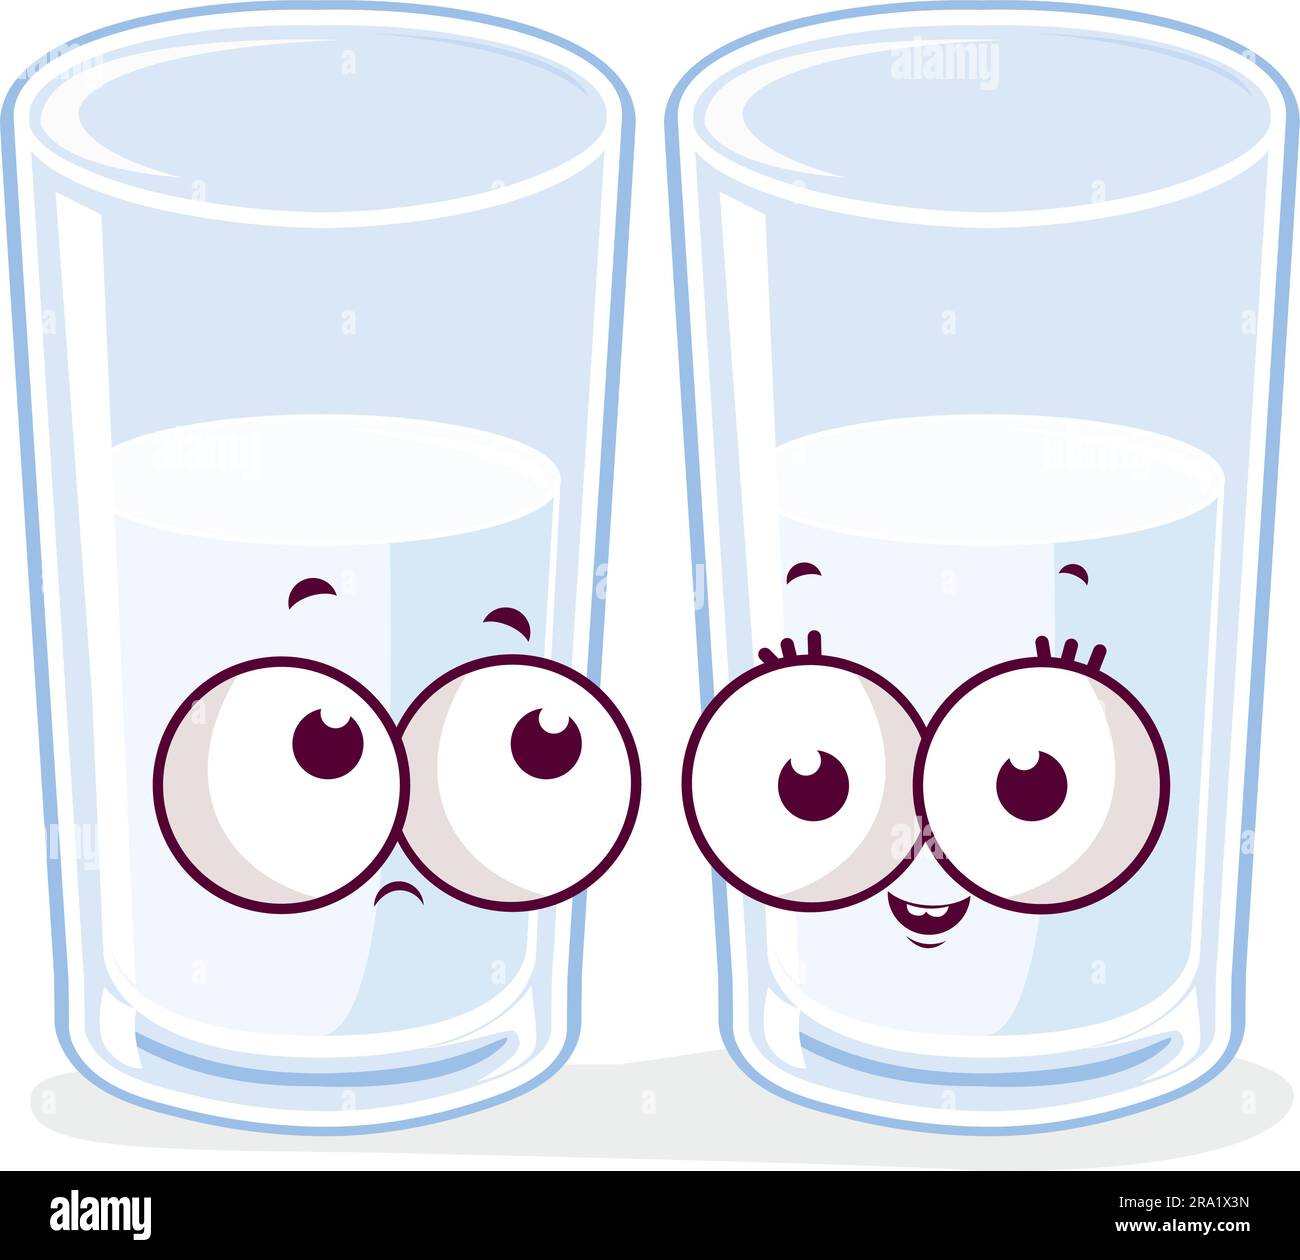 Half full and half empty cartoon glasses of water characters. Vector Illustration Stock Vector